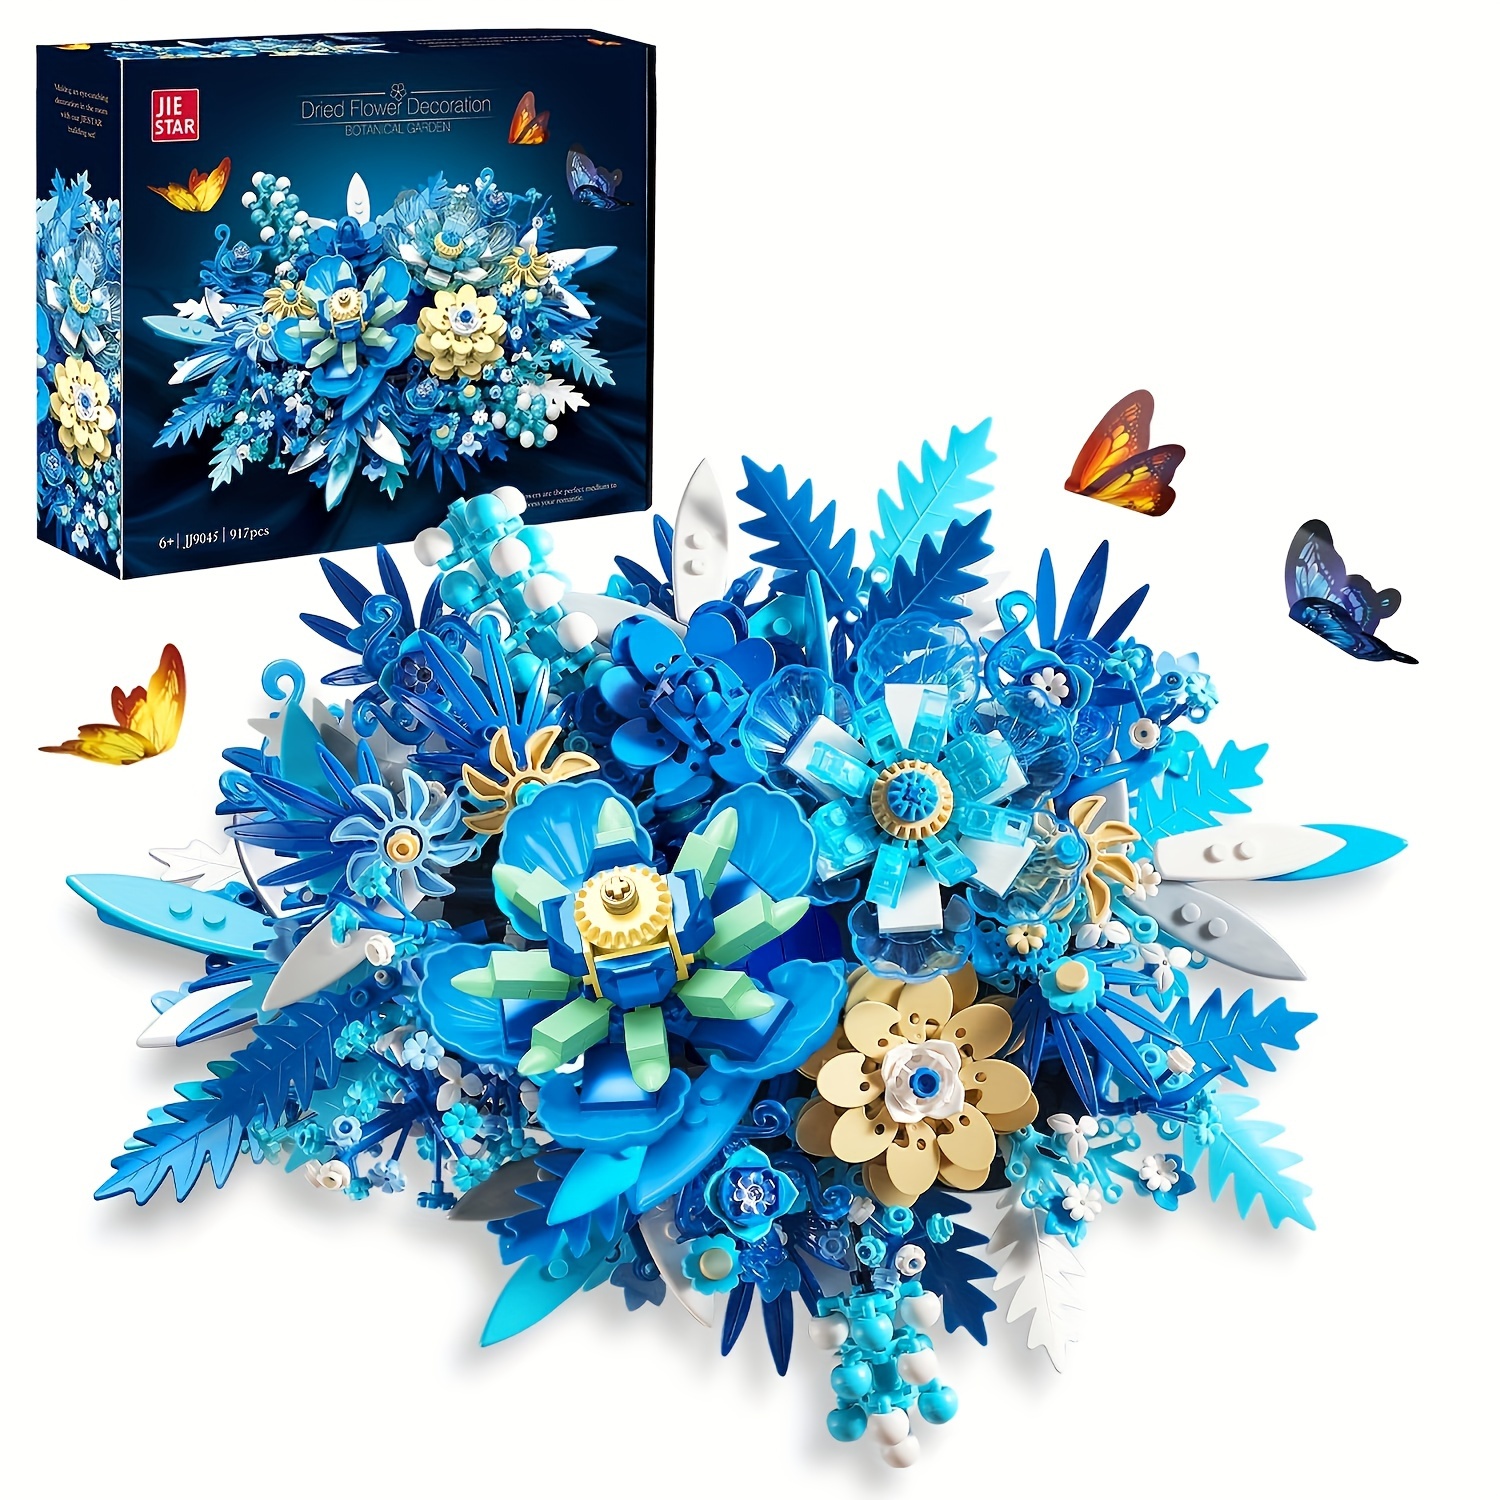 

Blue Flowers Building Sets For Adult, Centerpieces (917pcs), Botanical Collection Crafts For Table Or Wall Decoration, Unique Home Décor Gift With Beautiful Gift Box